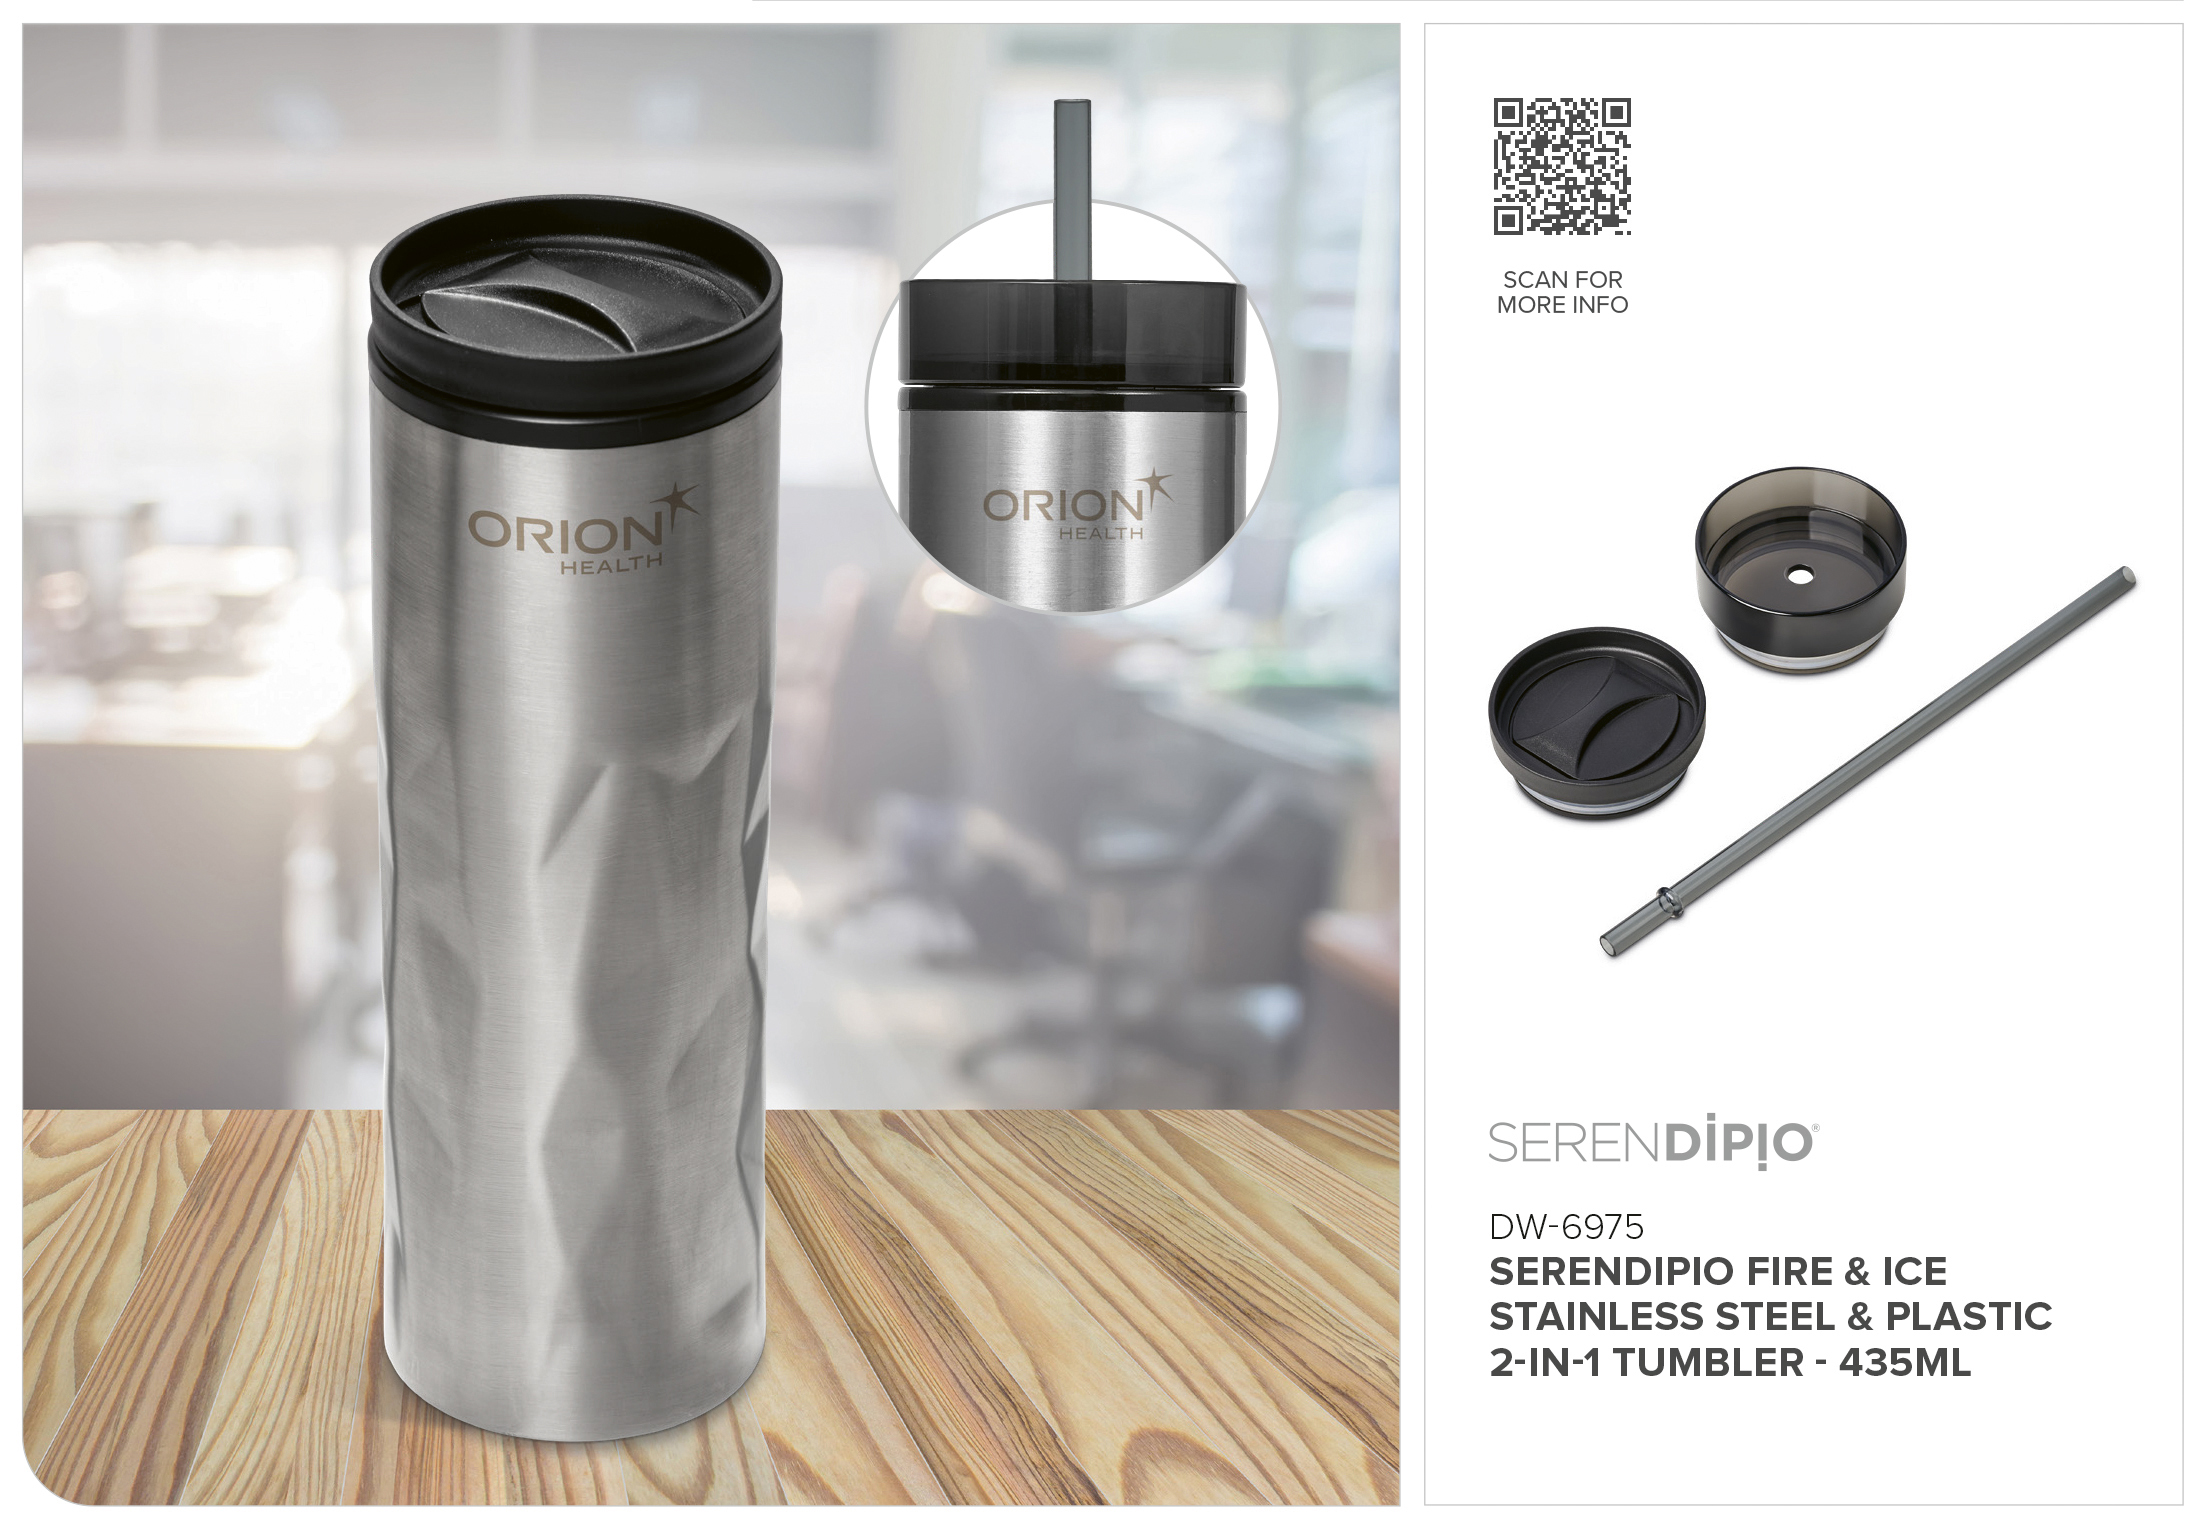 Serendipio Fire & Ice Stainless Steel & Plastic 2-In-1 Tumbler - 435ml CATALOGUE_IMAGE